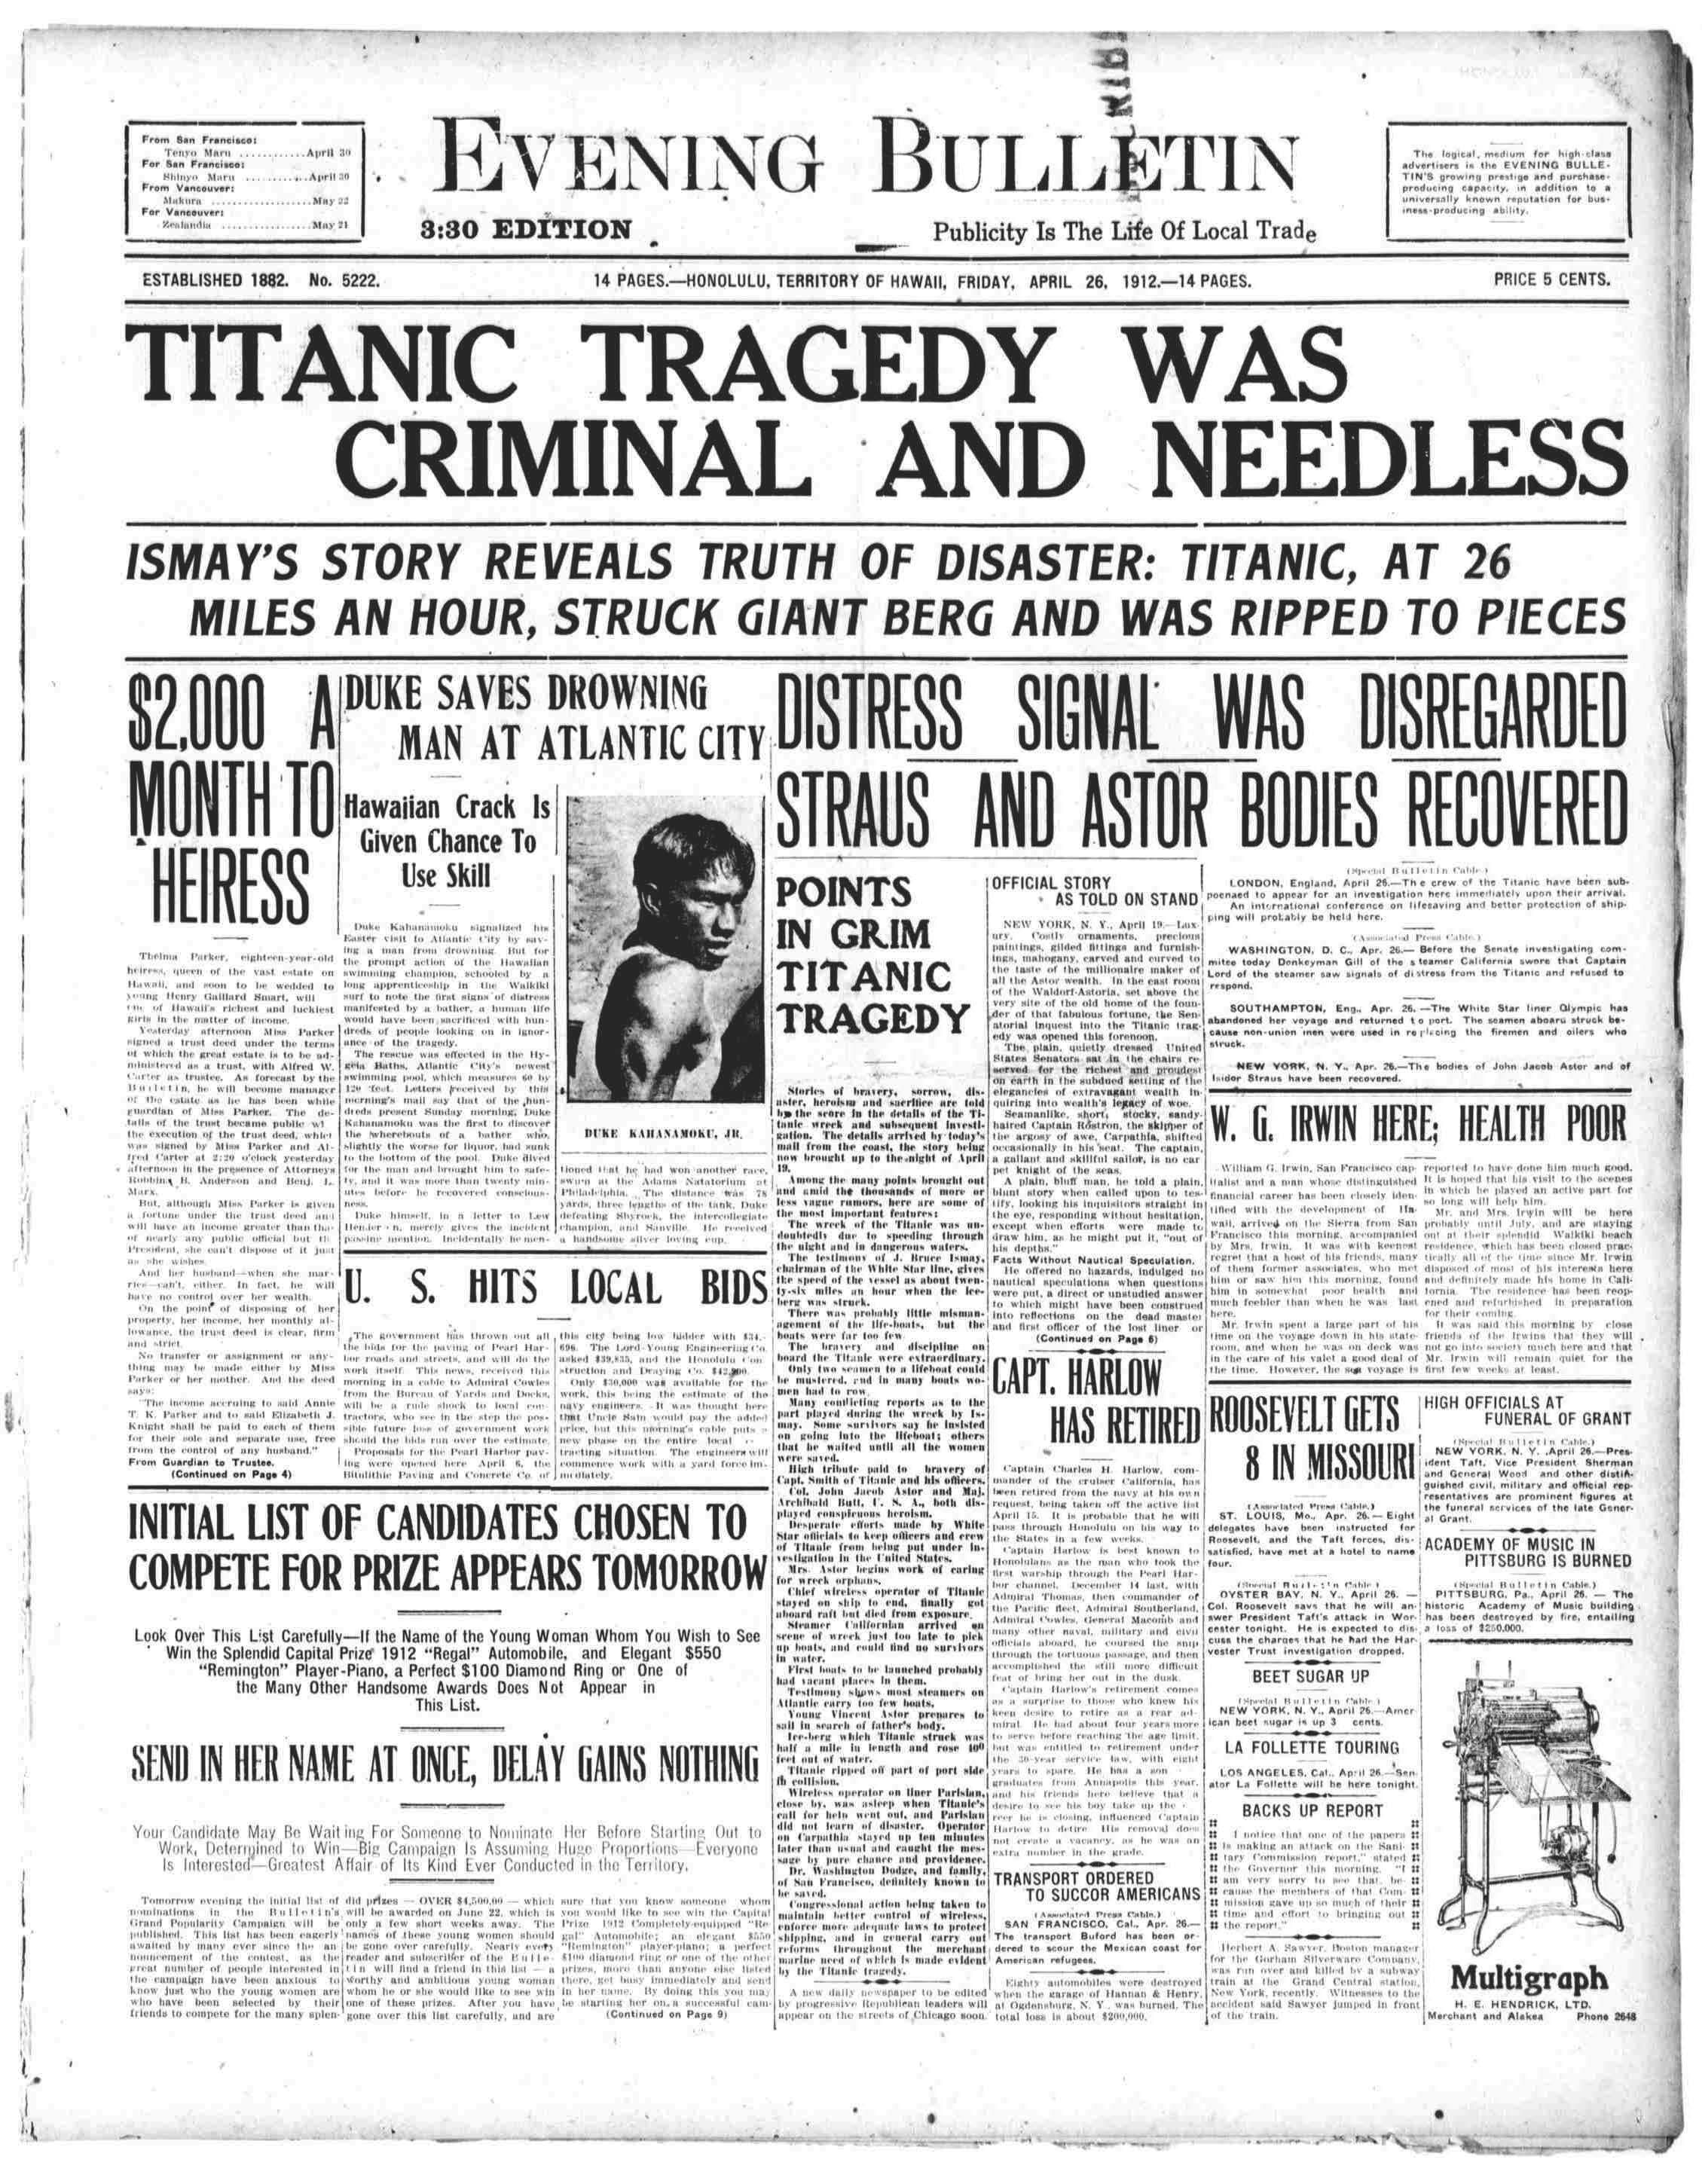 RMS TITANIC SINKS 1912 NEWSPAPER Collectors Token/Medal Fine Silver White Star 